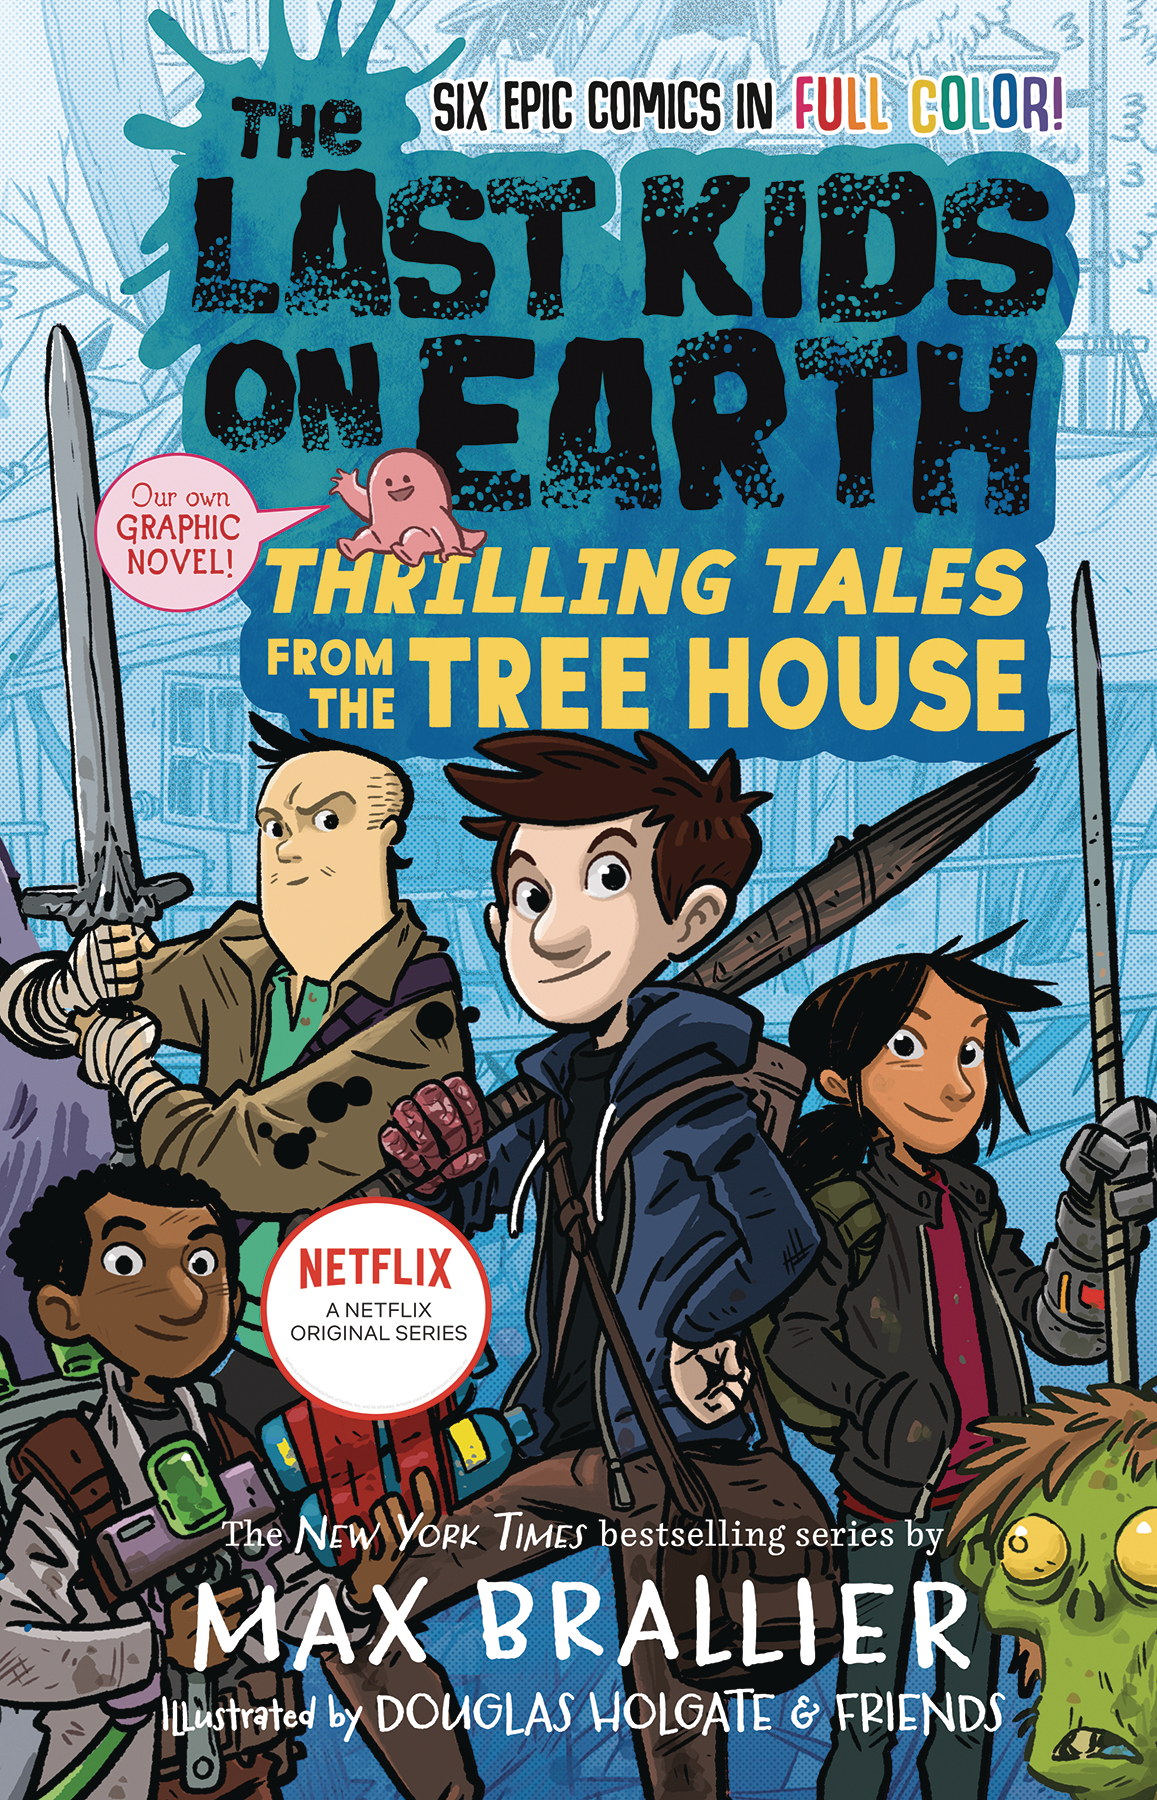 Last Kids On Earth Graphic Novel Volume 1 Thrilling Tales From Tree House